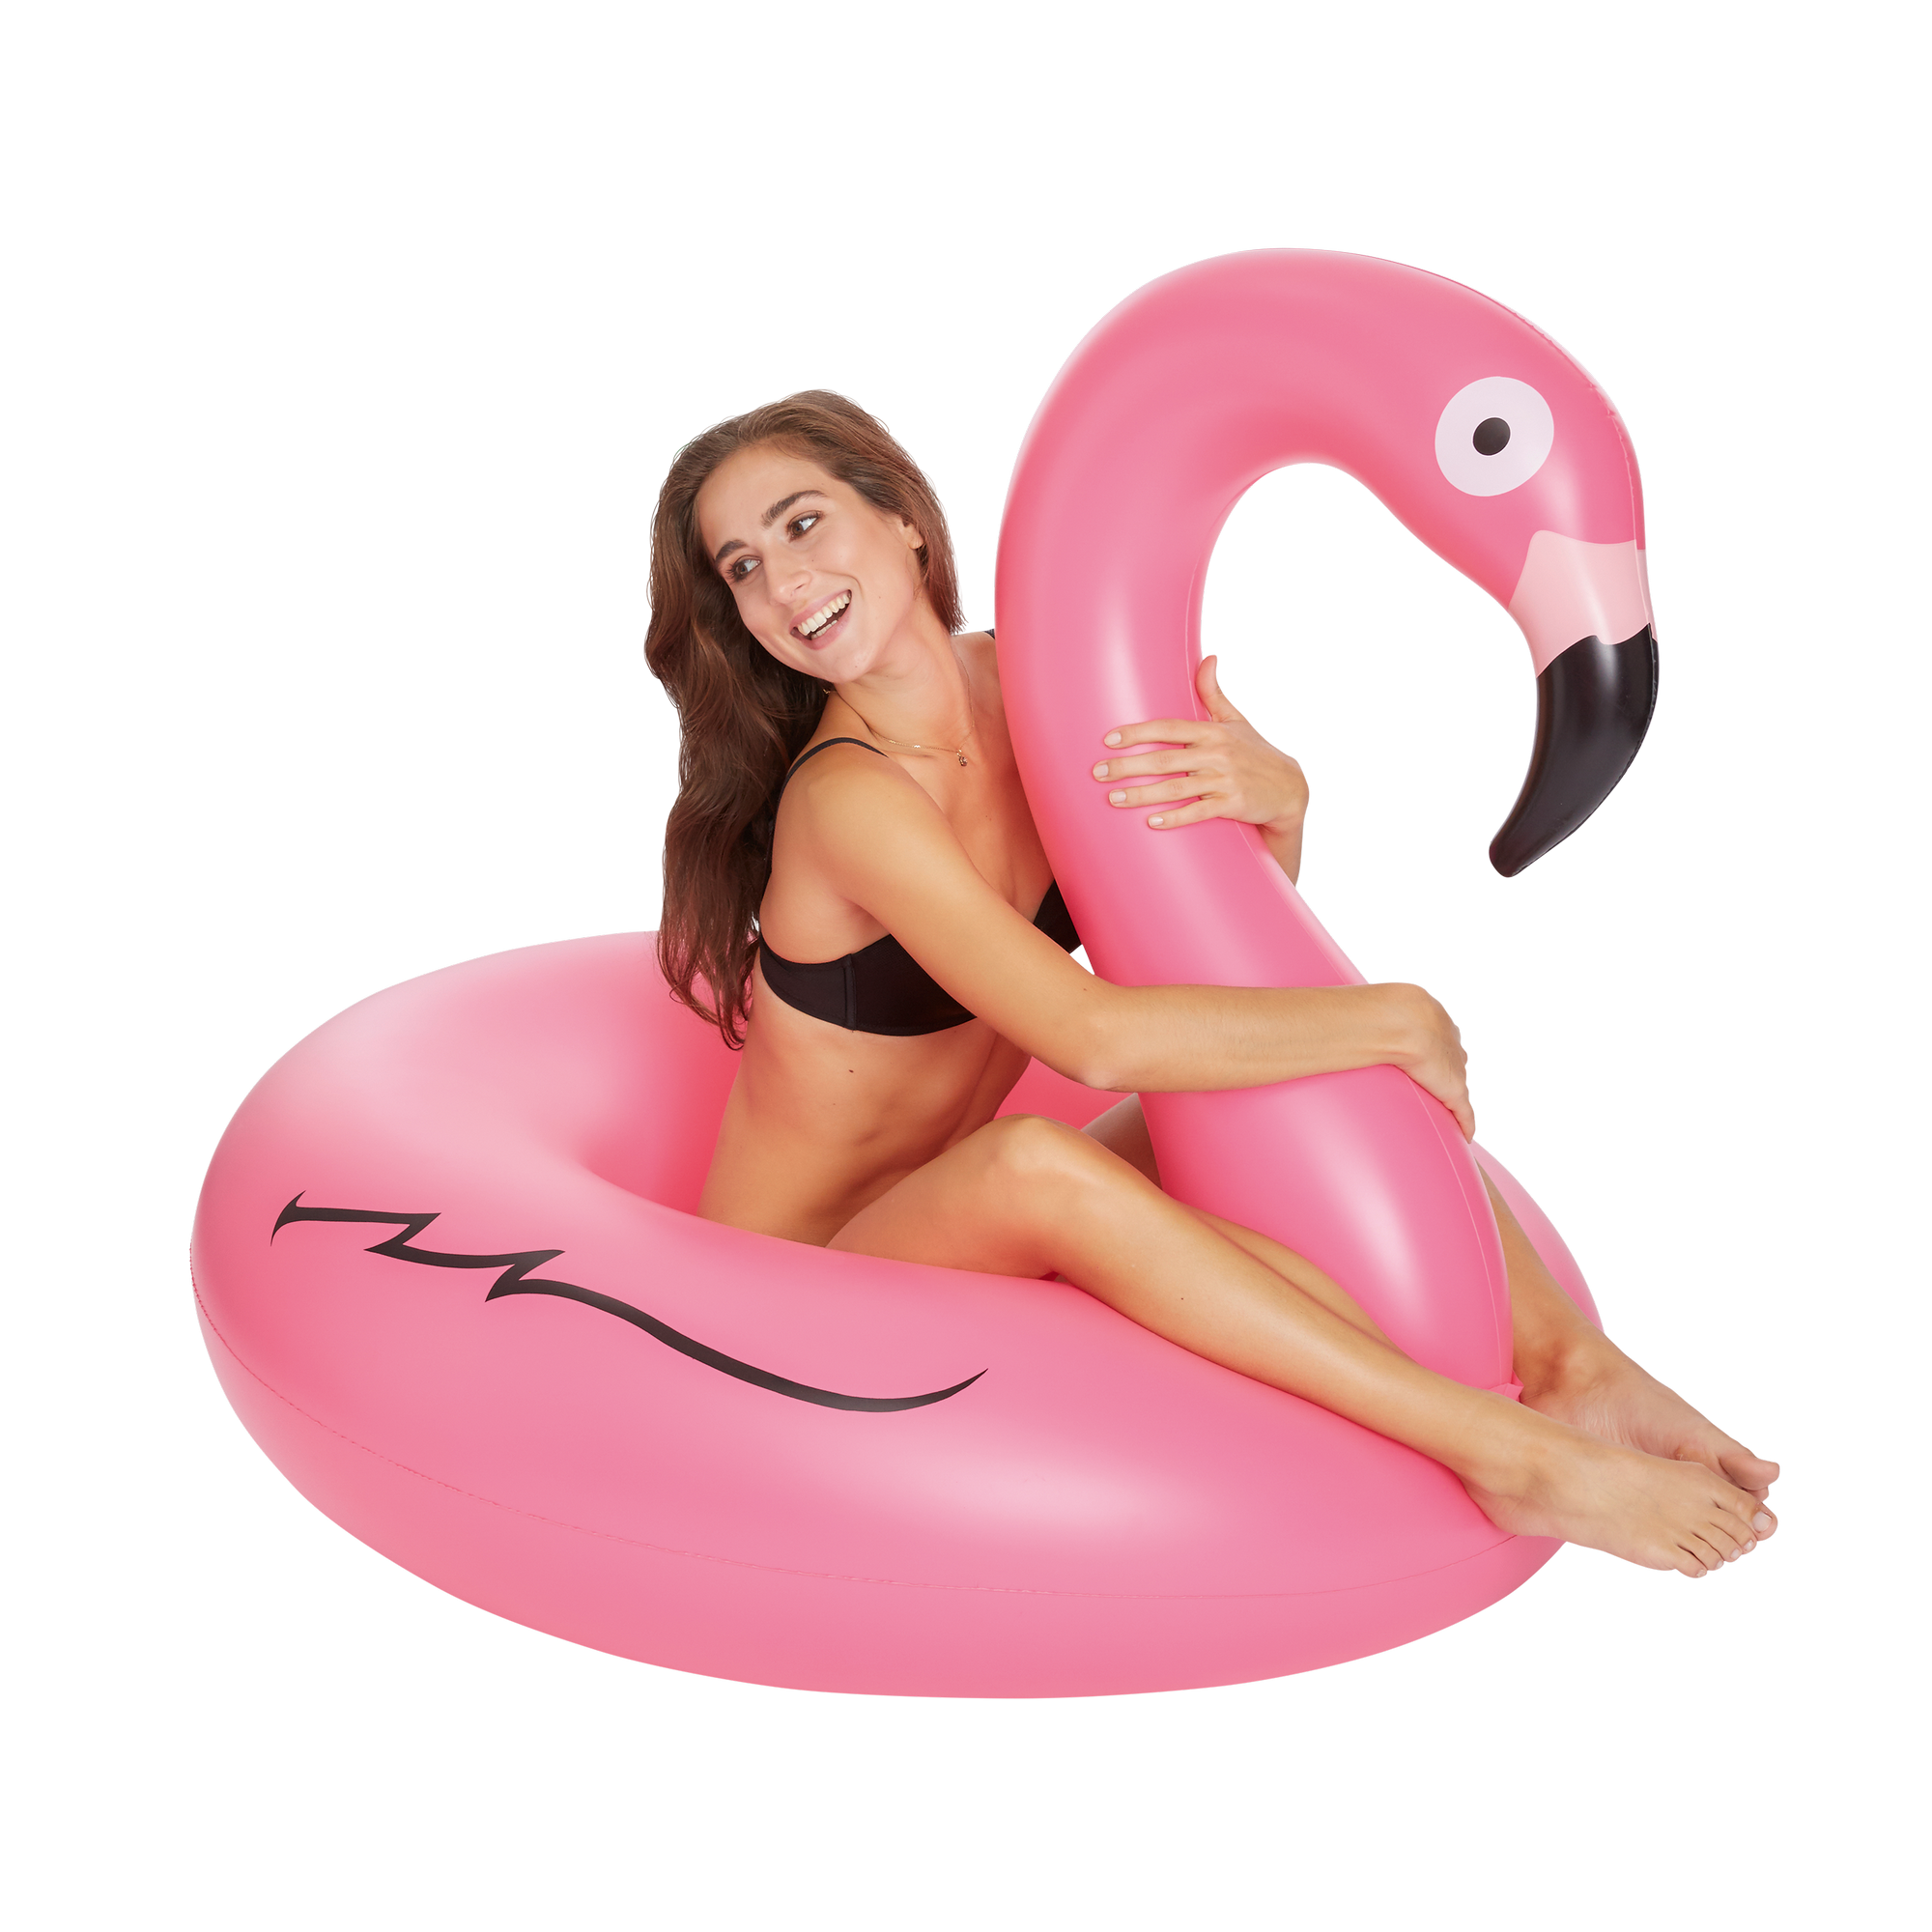 Schwimmring 'Flamingo' pink Ø 120 cm + product picture